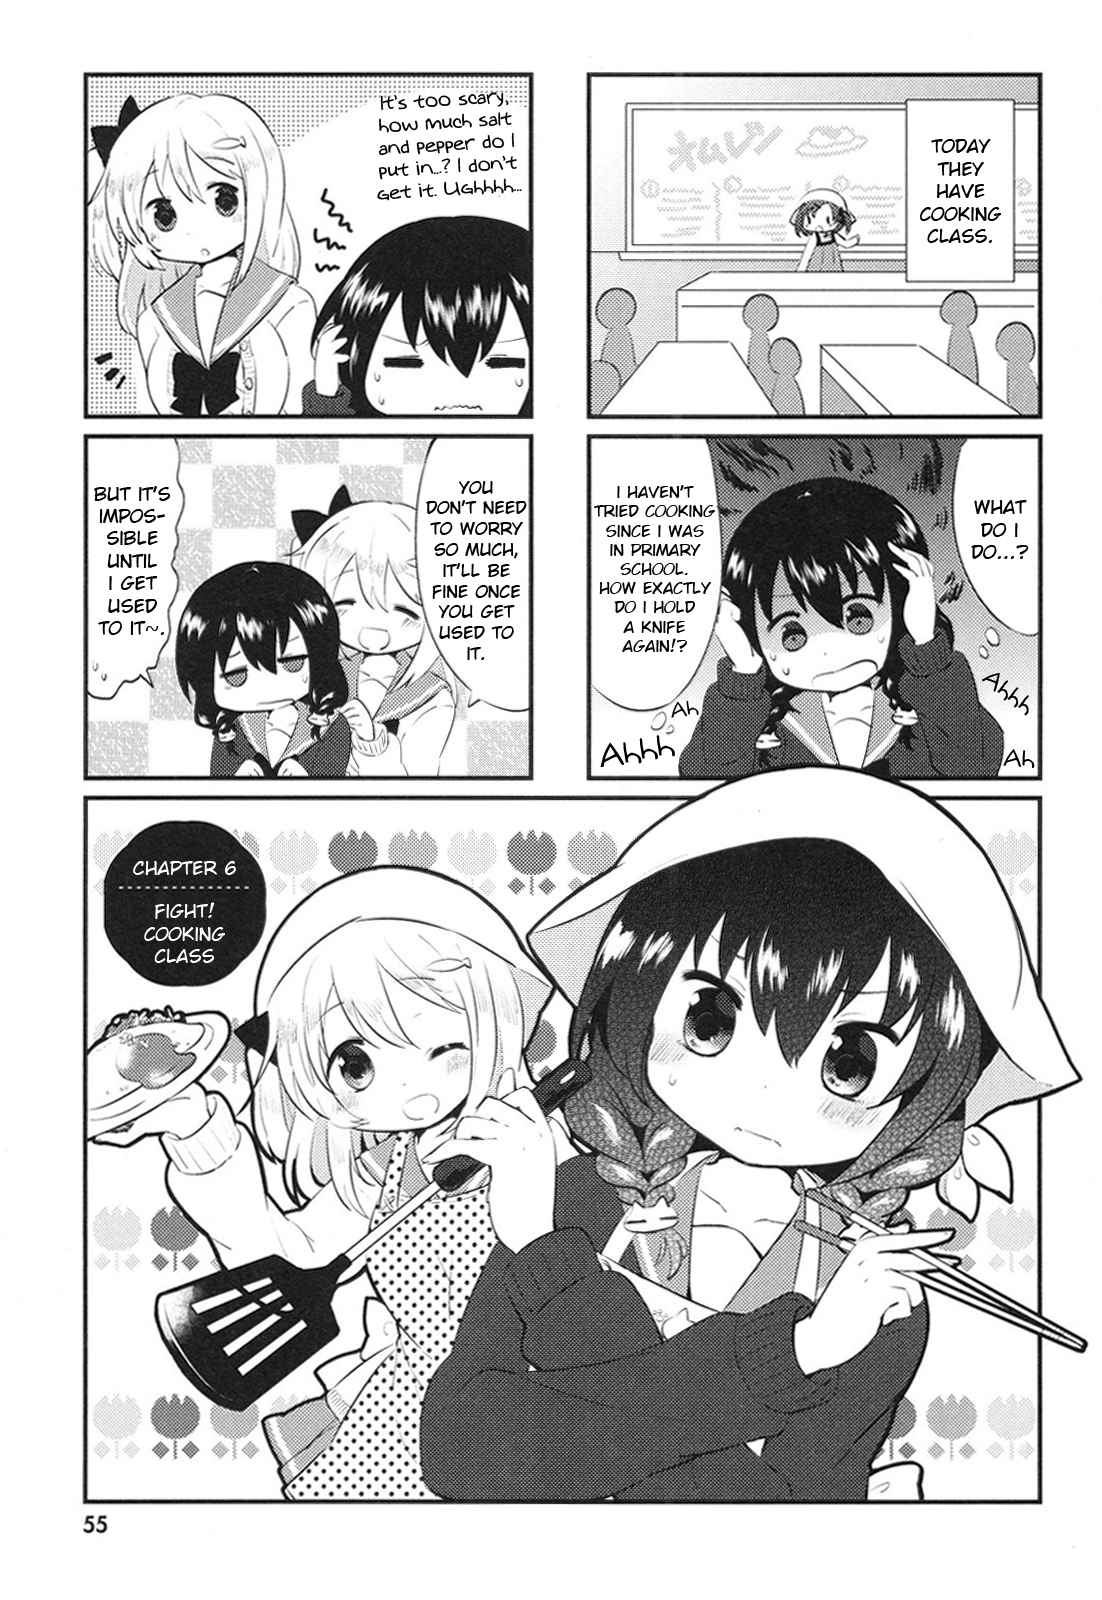 Nyanko Days Vol. 1 Ch. 6 Fight! Cooking Class